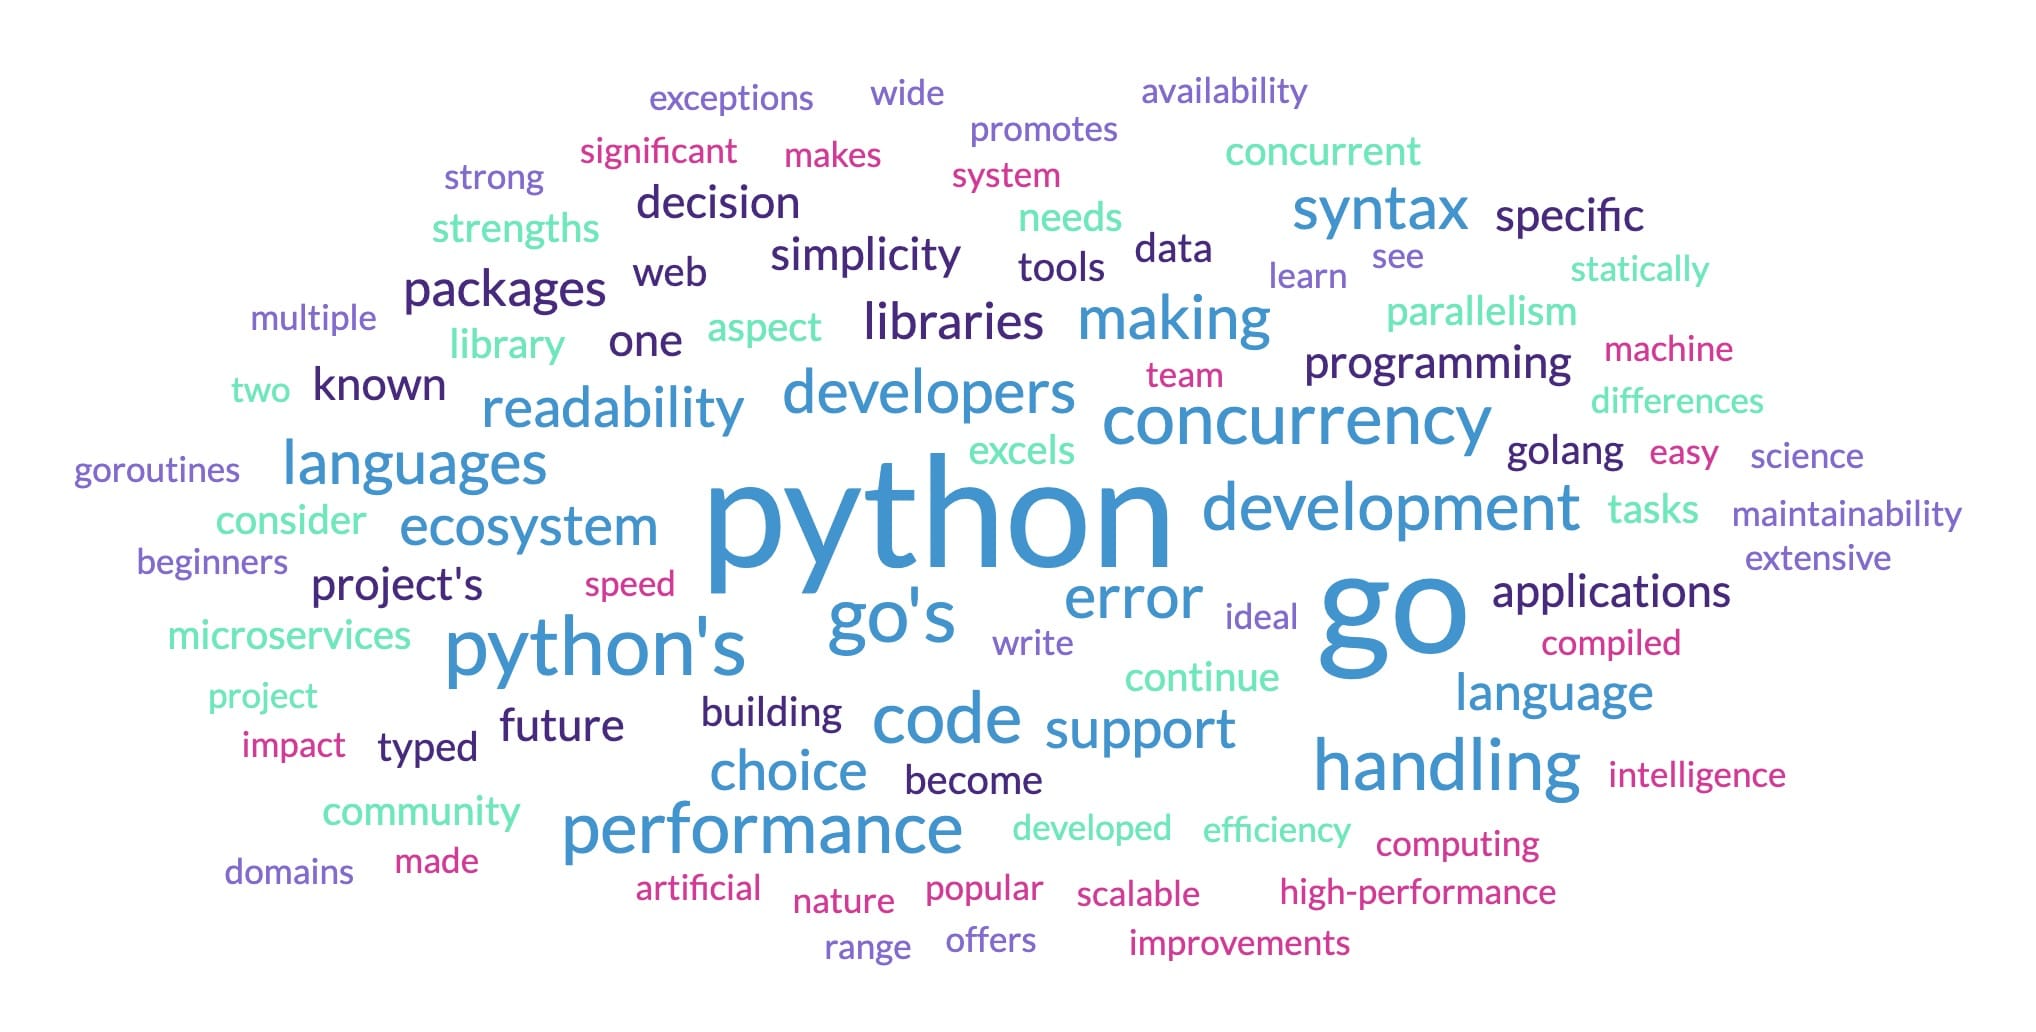 Go vs Python: The Differences in 2023